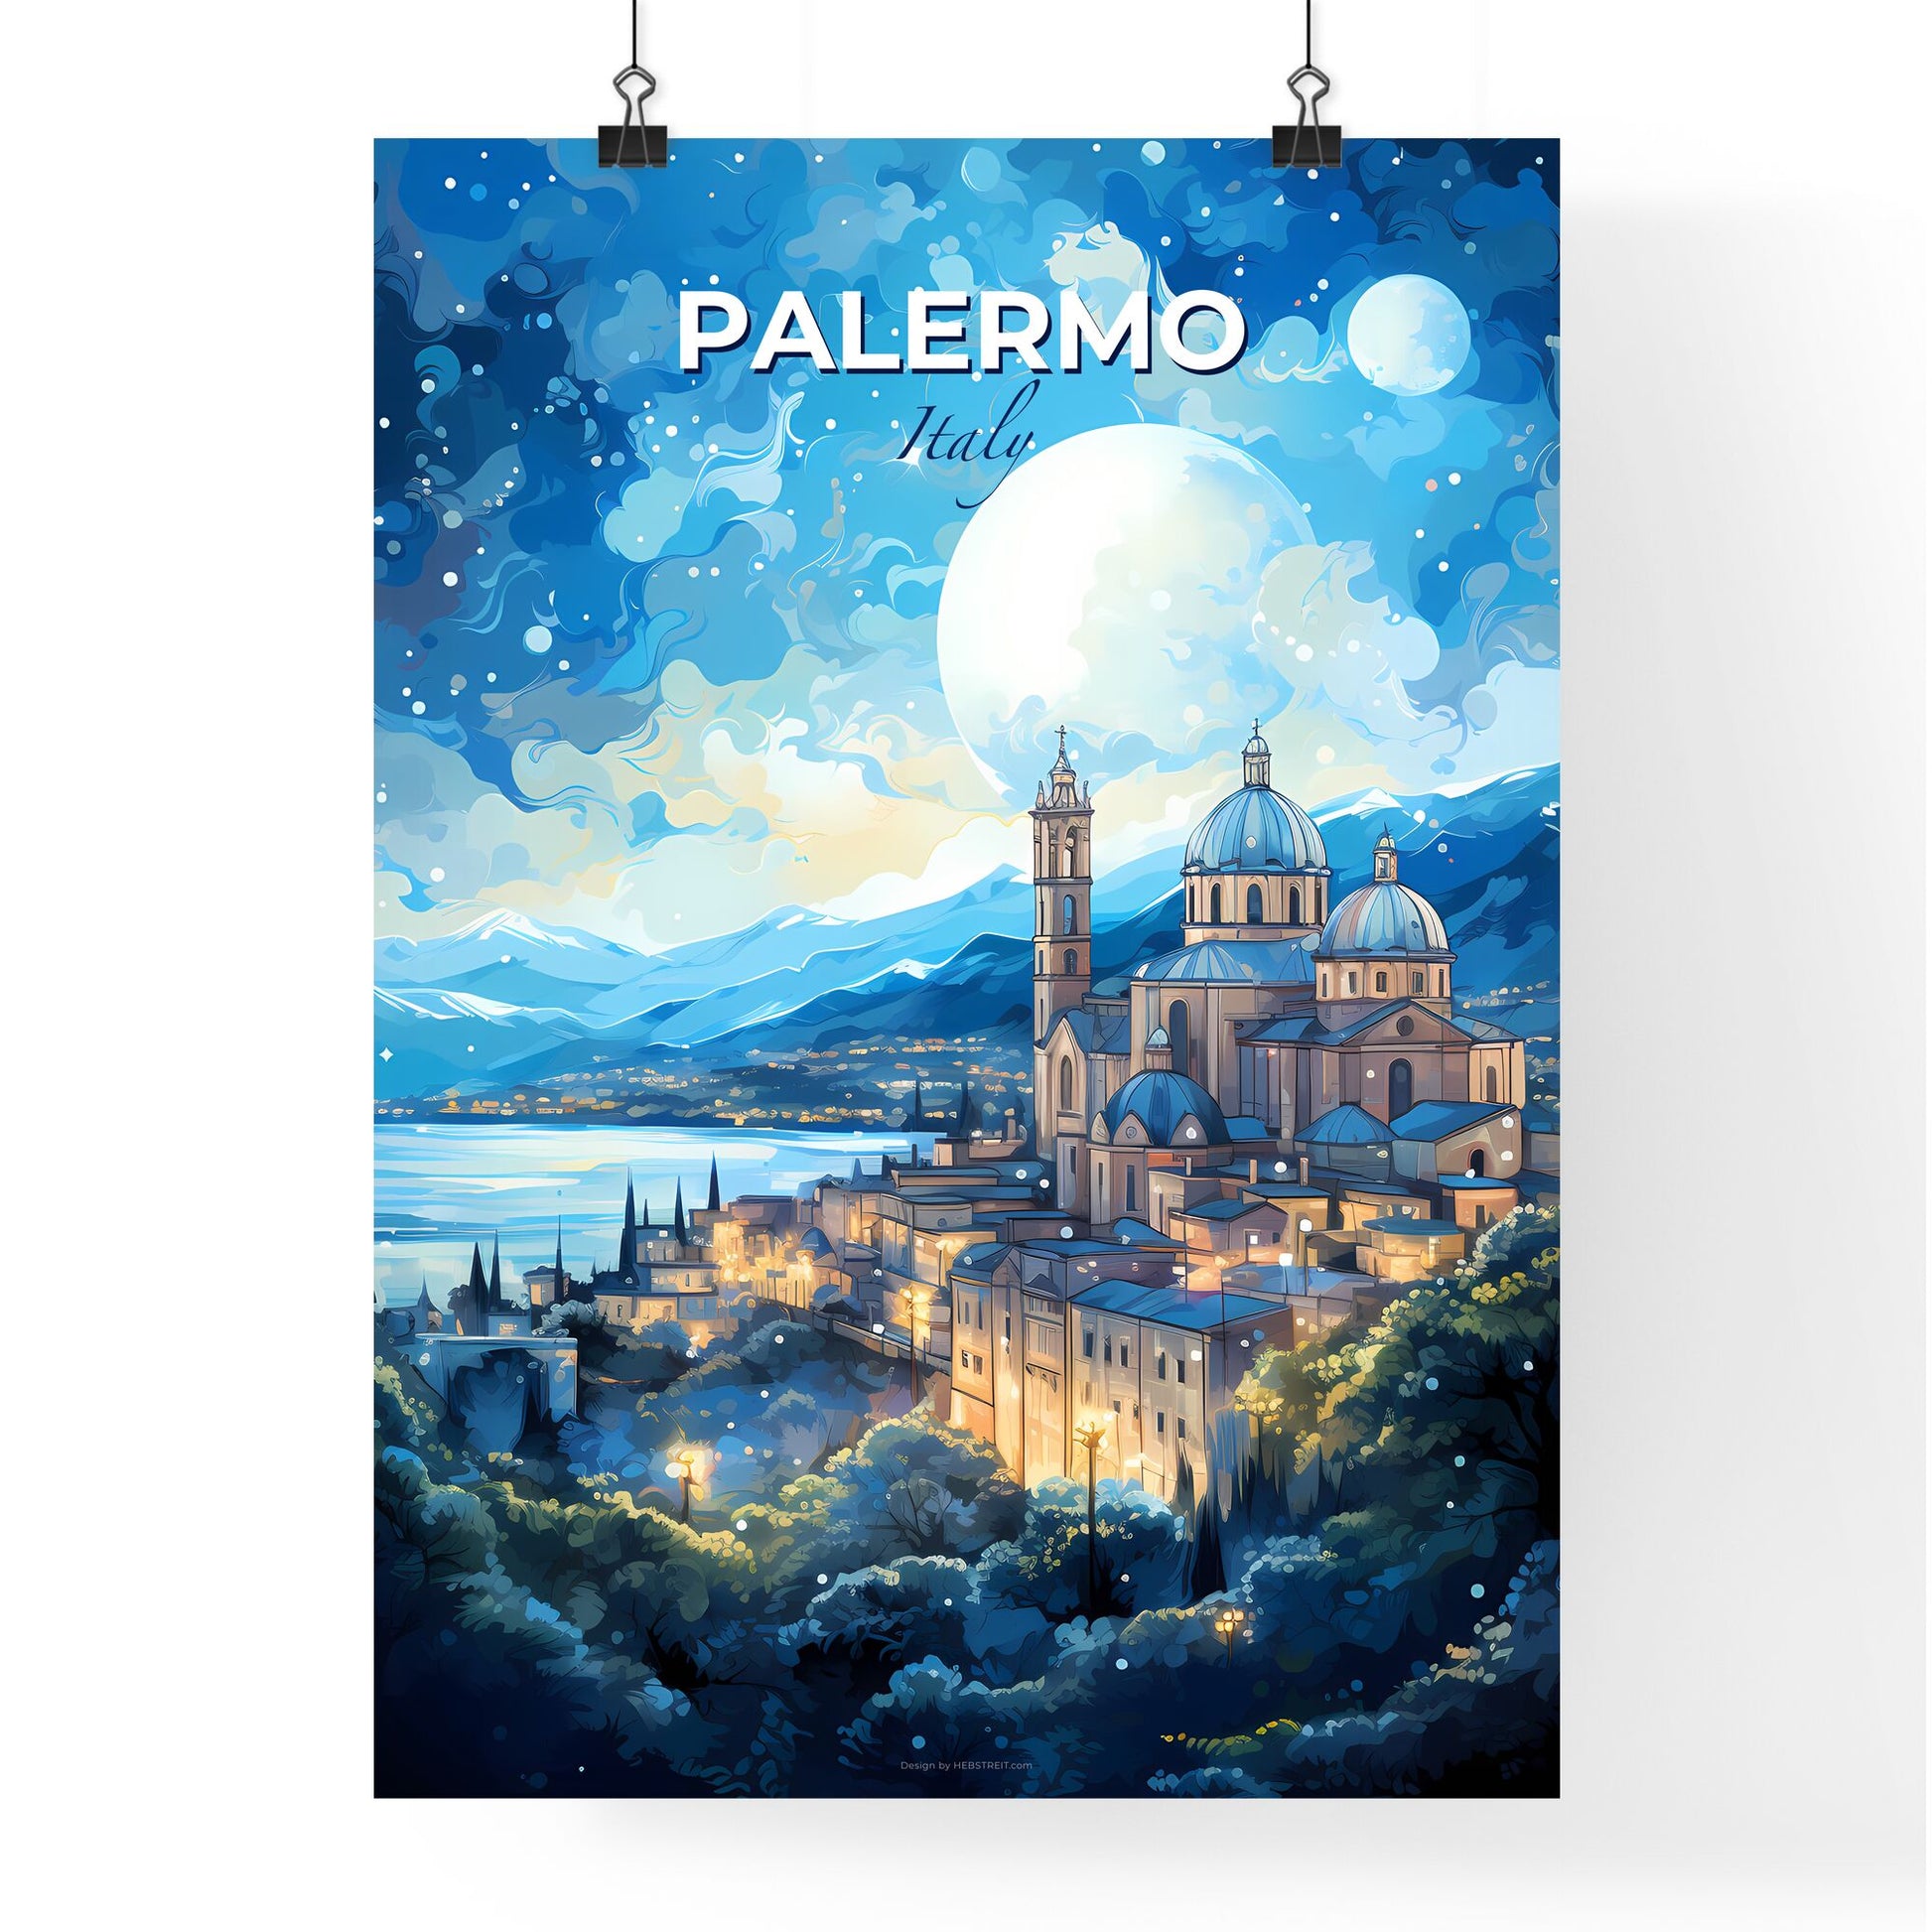 Palermo Italy Skyline - A City With A Large Moon In The Sky - Customizable Travel Gift Default Title